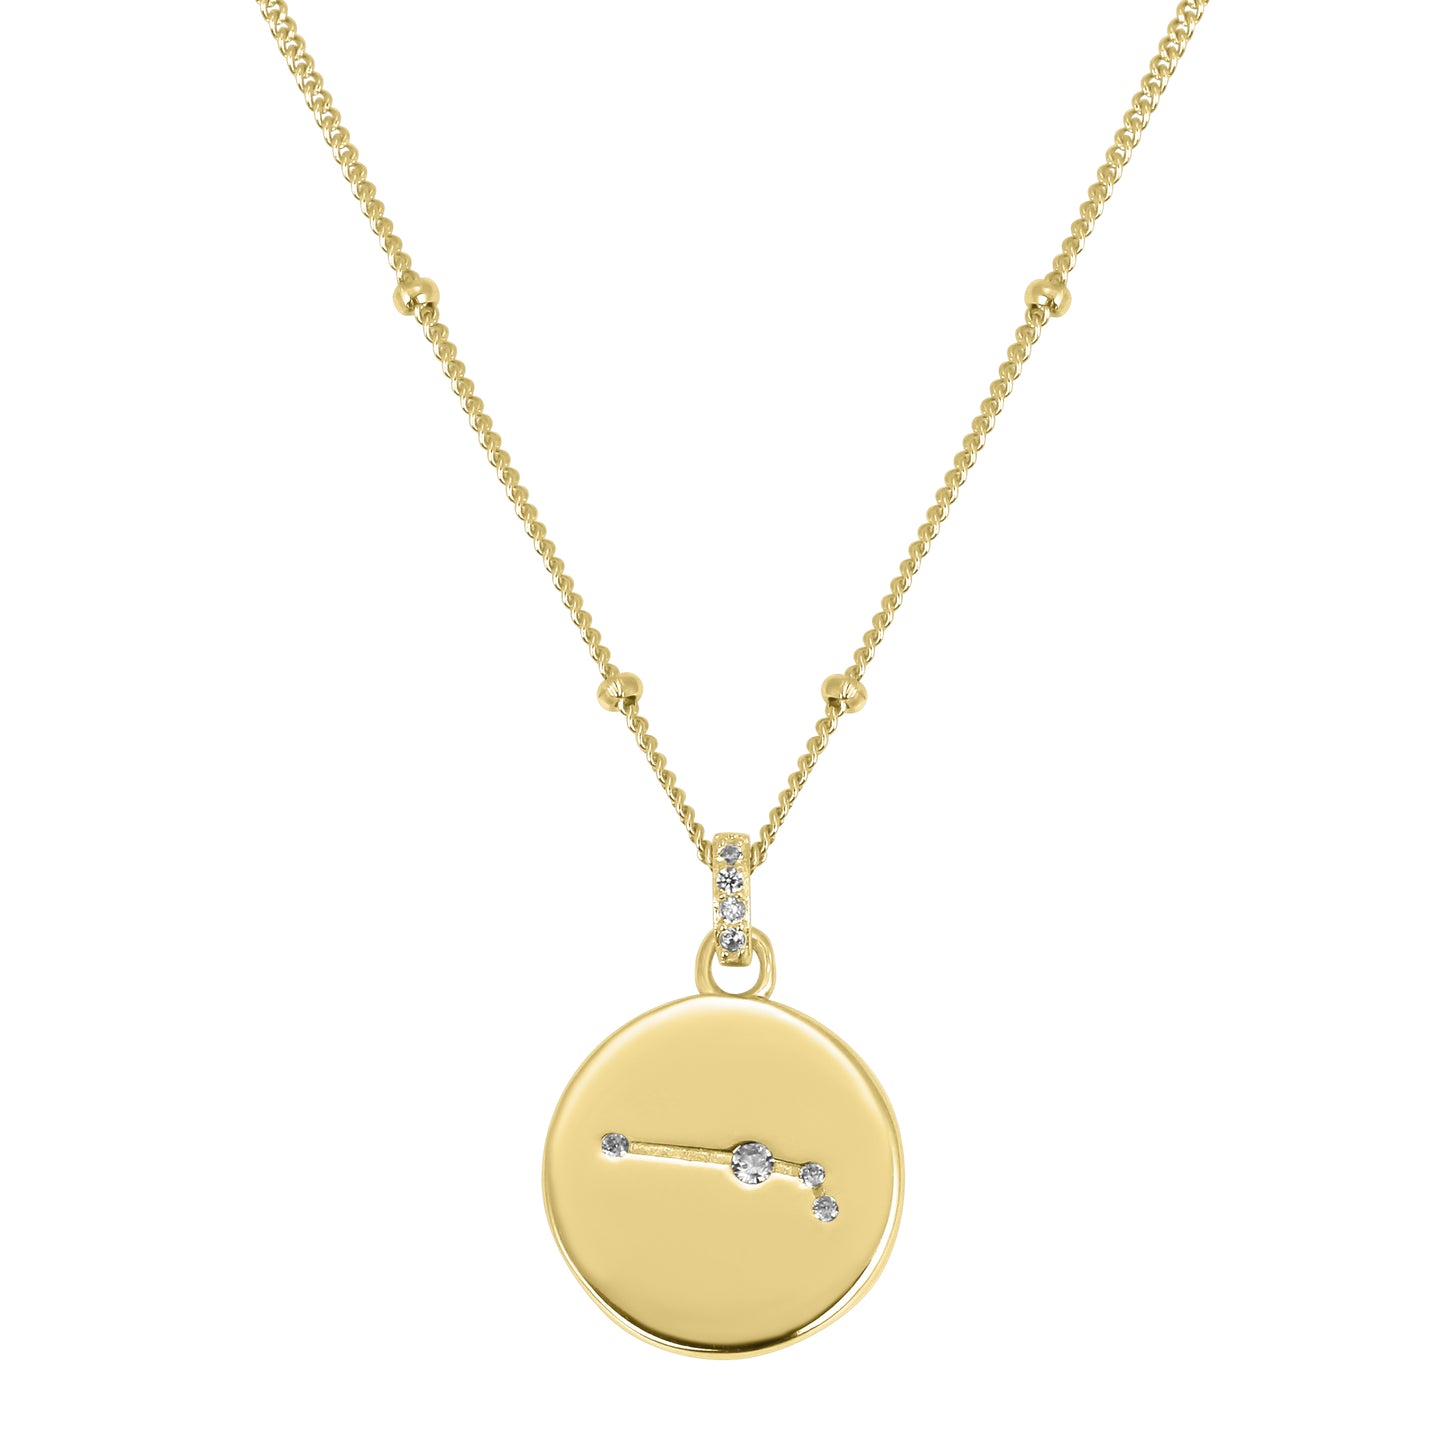 The Stars Aligned Constellation Necklace